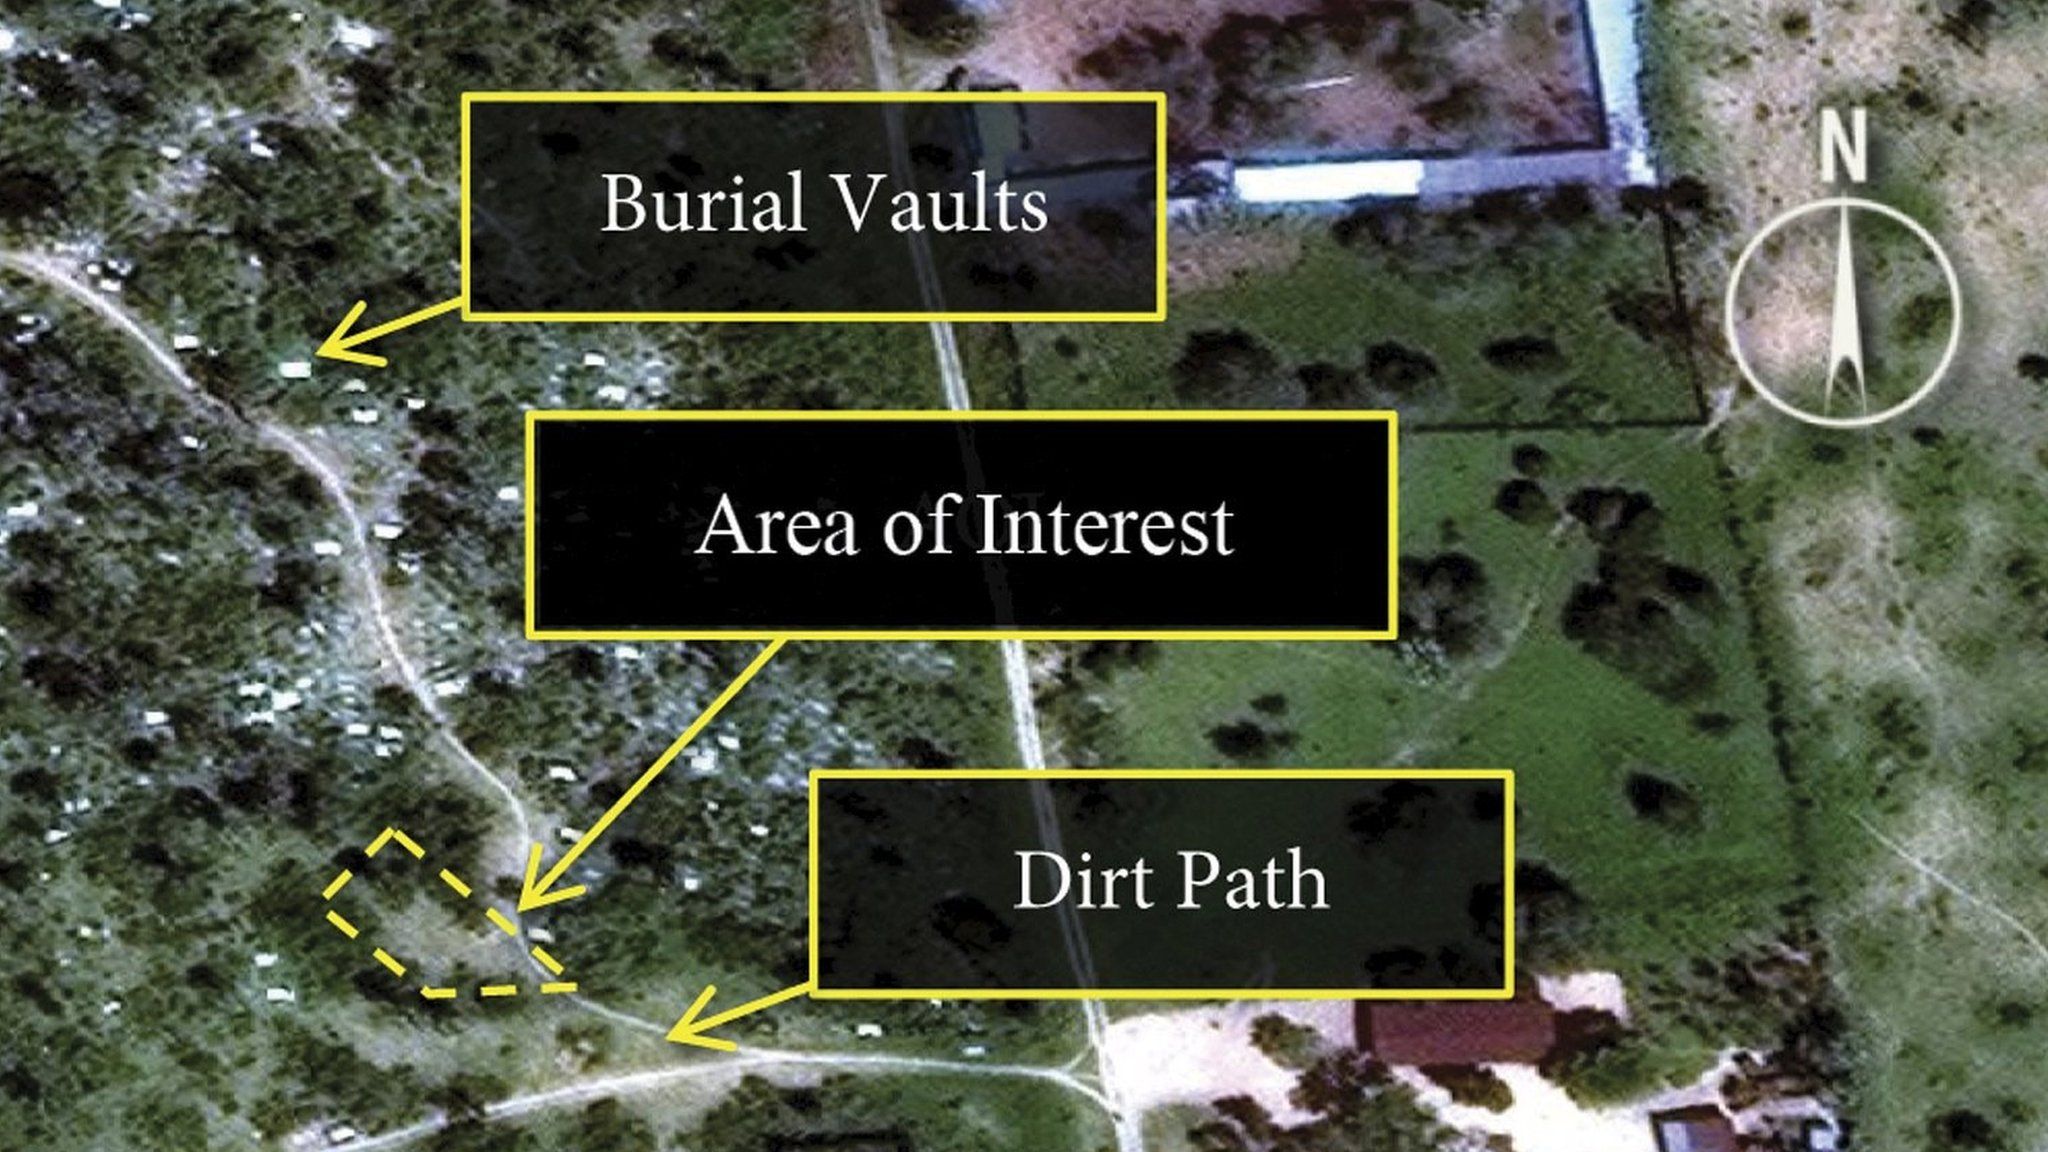 A DigitalGlobe satellite image released by Amnesty International shows what the human rights organization describes as an area prior to the emergence of a mass grave in Burundi